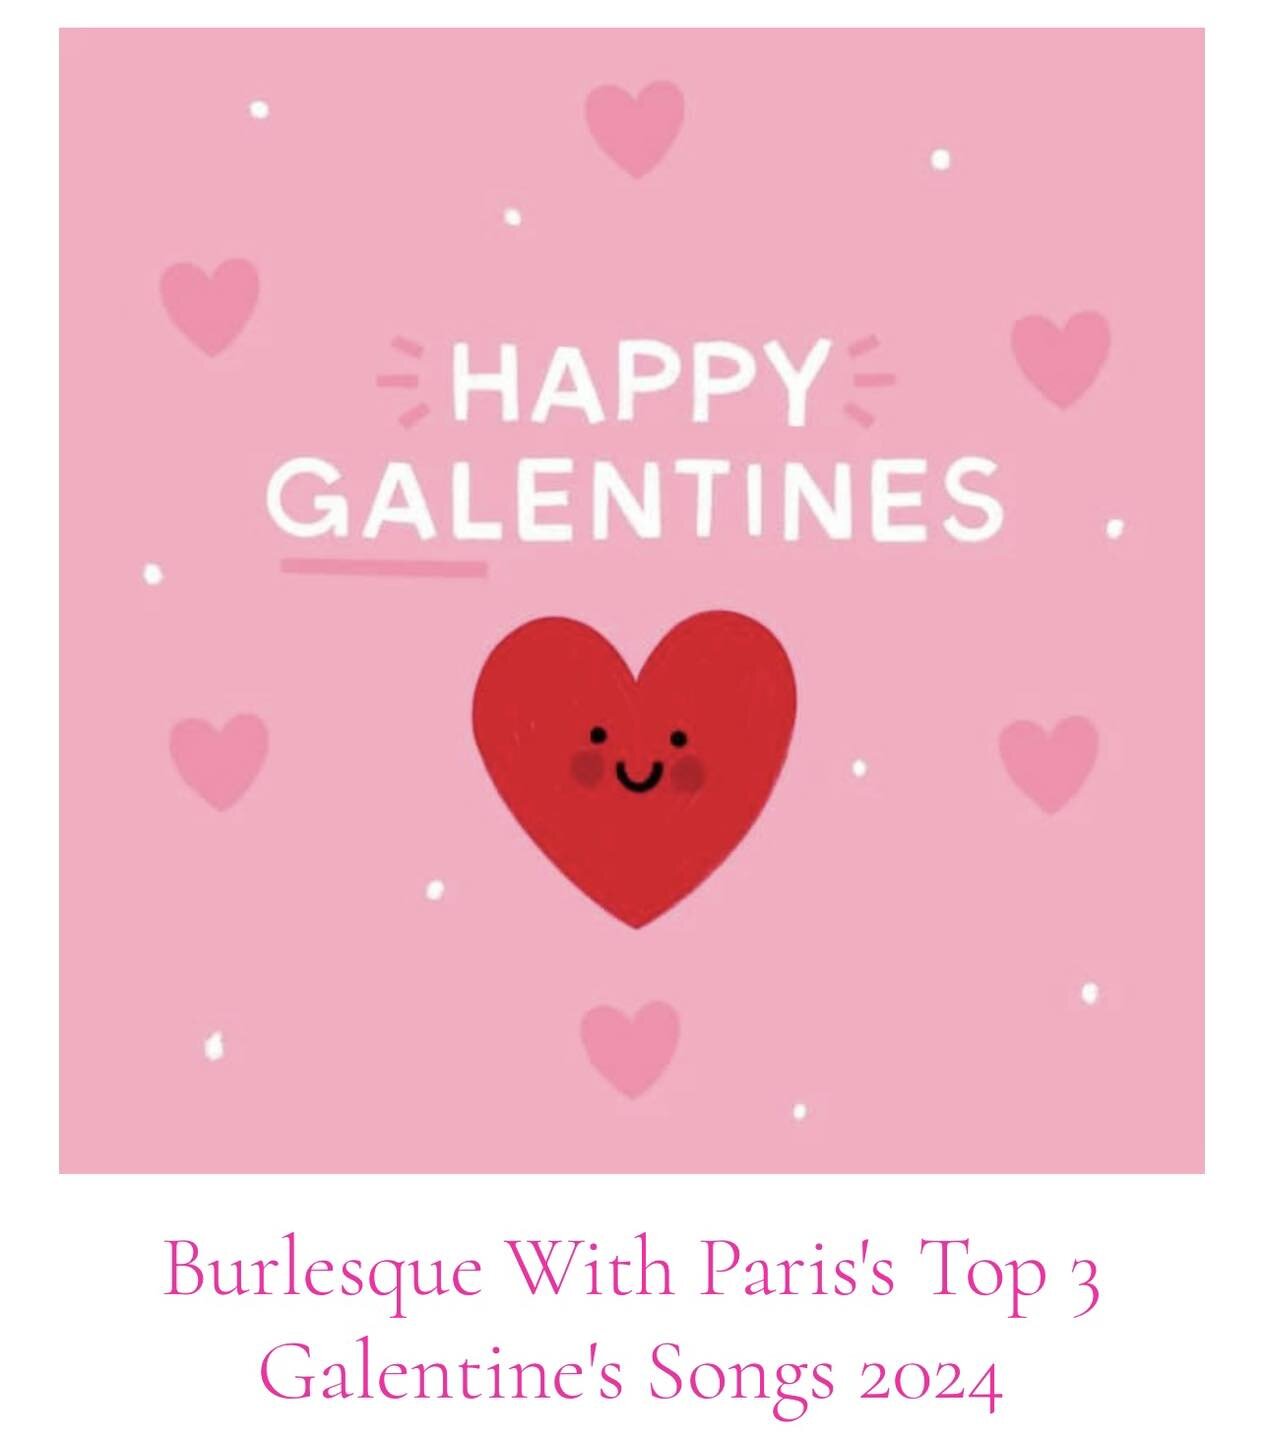 Burlesque With Paris's Top 3 Galentines Songs For 2024...

Visit our website and start your Galentines Song Playlist With Our Top 3 Galentines Songs For 2024...
burlesquewithparis.co.uk/blog/2024/2/13/burlesque-with-pariss-top-3-galentines-songs-for-